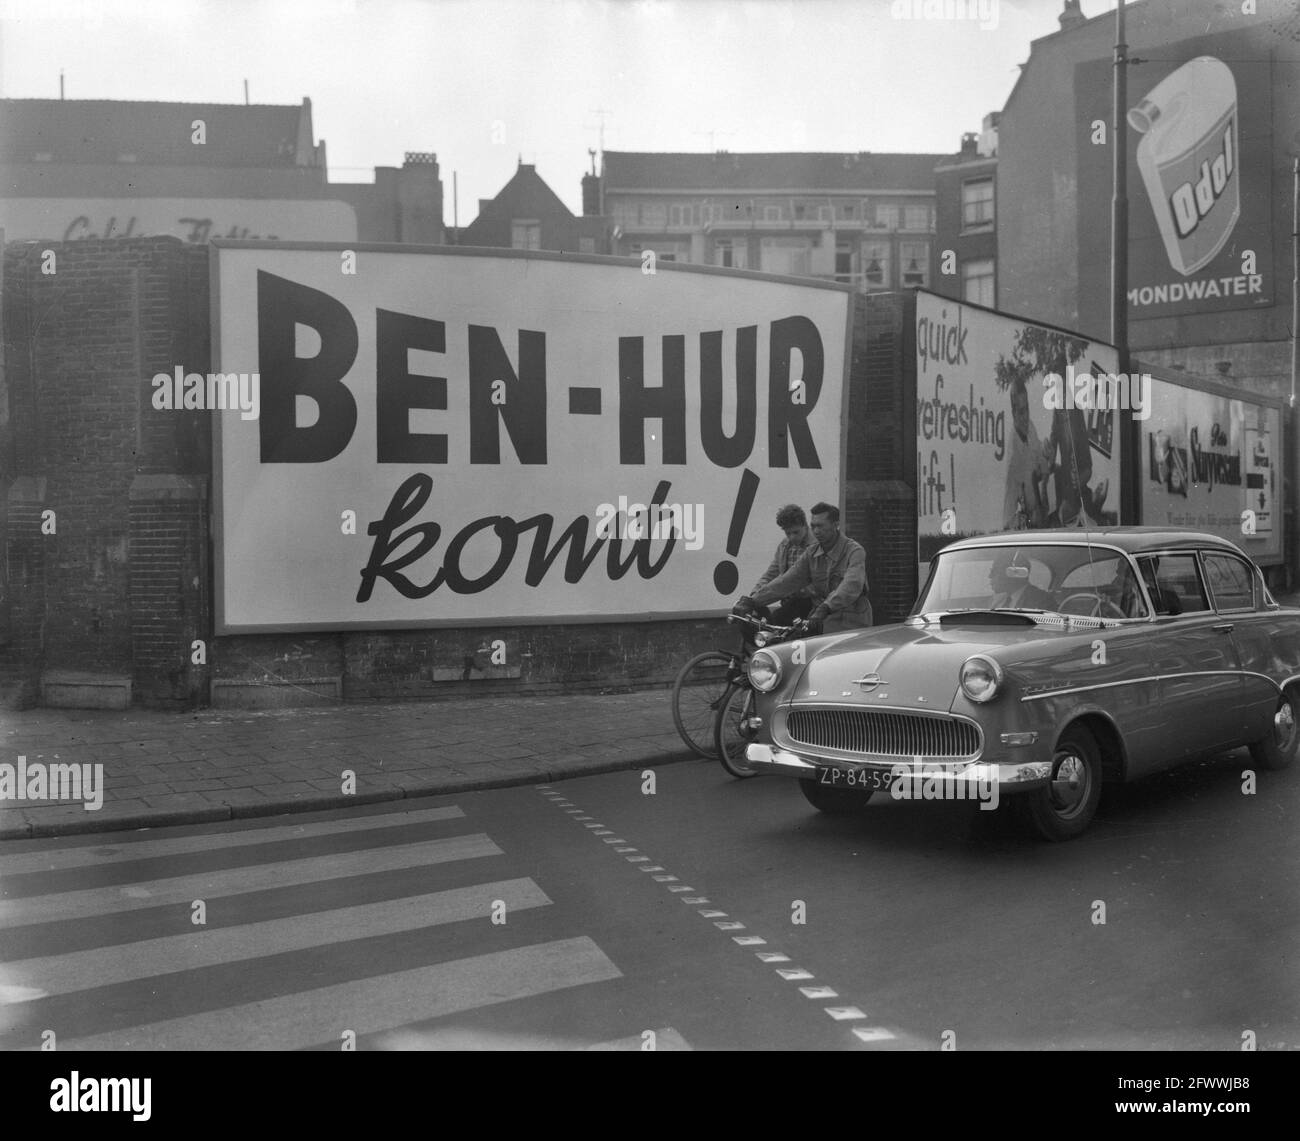 Order MGU fence film Ben Hur, 2 October 1959, FILM, orders, fences, The Netherlands, 20th century press agency photo, news to remember, documentary, historic photography 1945-1990, visual stories, human history of the Twentieth Century, capturing moments in time Stock Photo